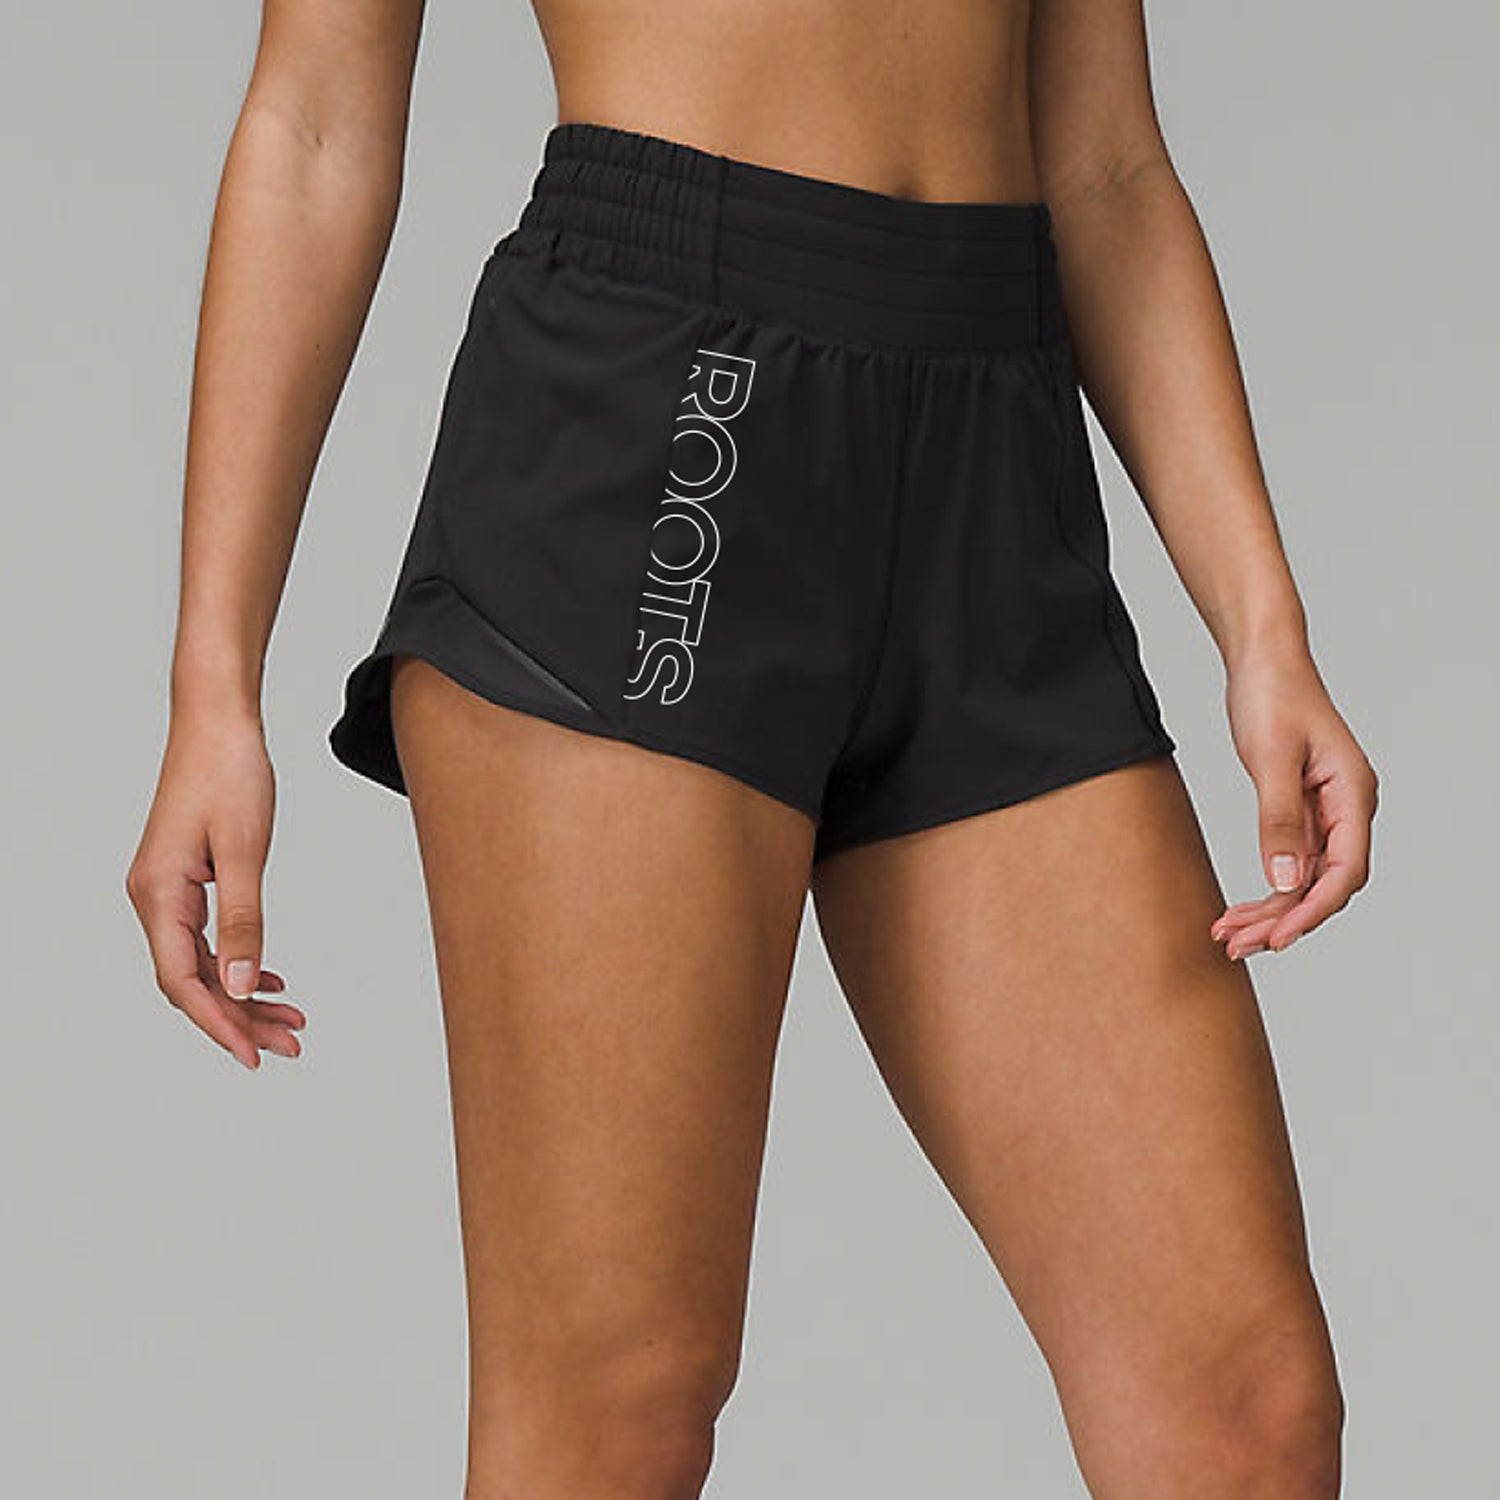 ROOTS / Lululemon - Hotty Hot High Rise Short 2.5 *Lined